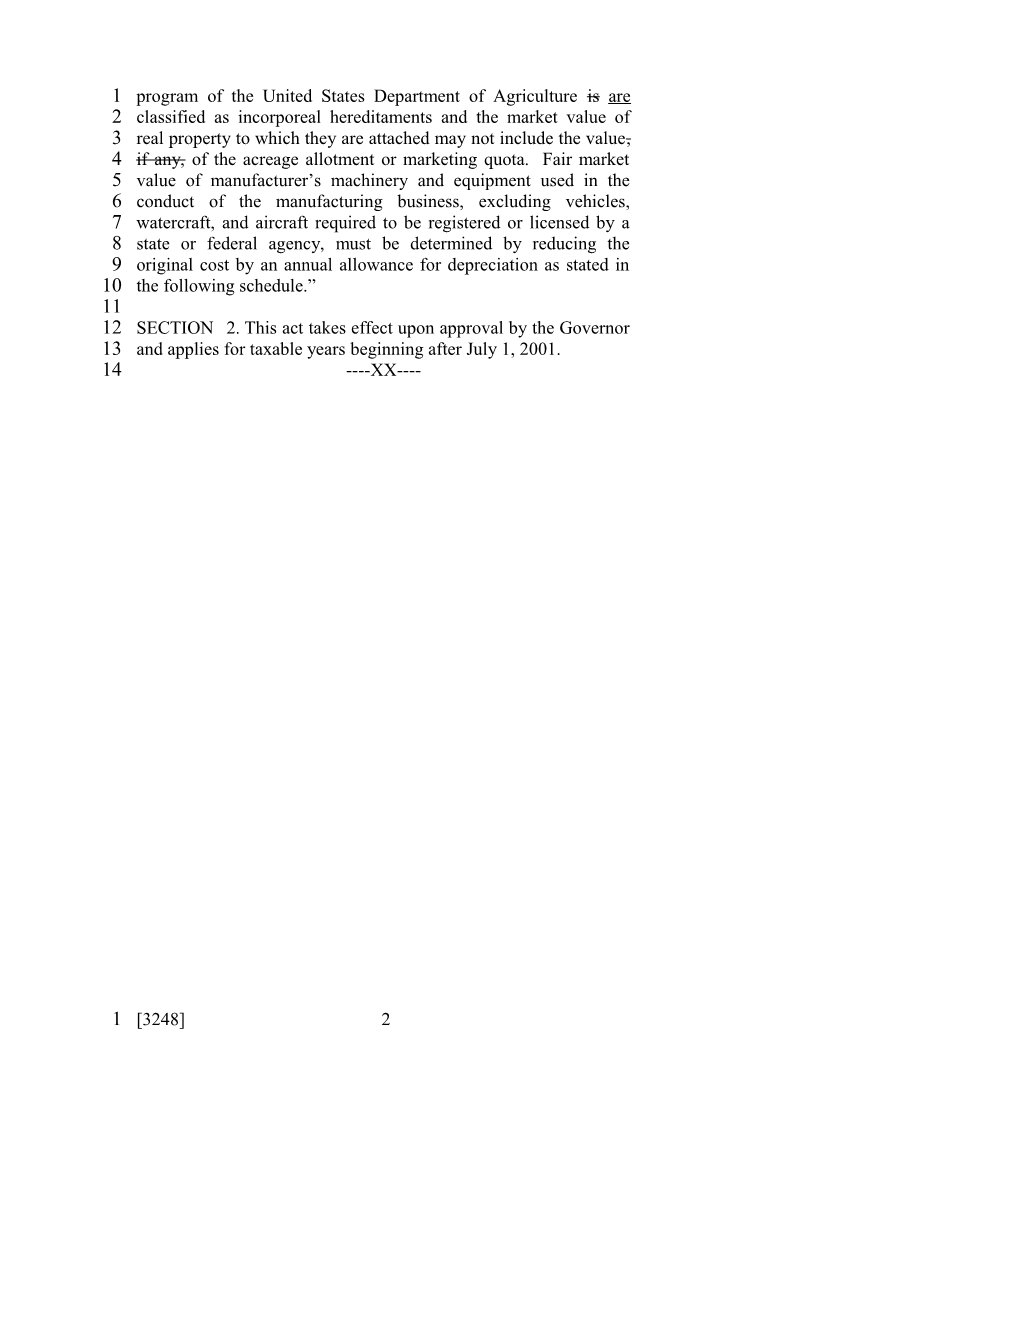 2001-2002 Bill 3248: Property Tax Assessments, Fair Market Valuation to Be Displayed On